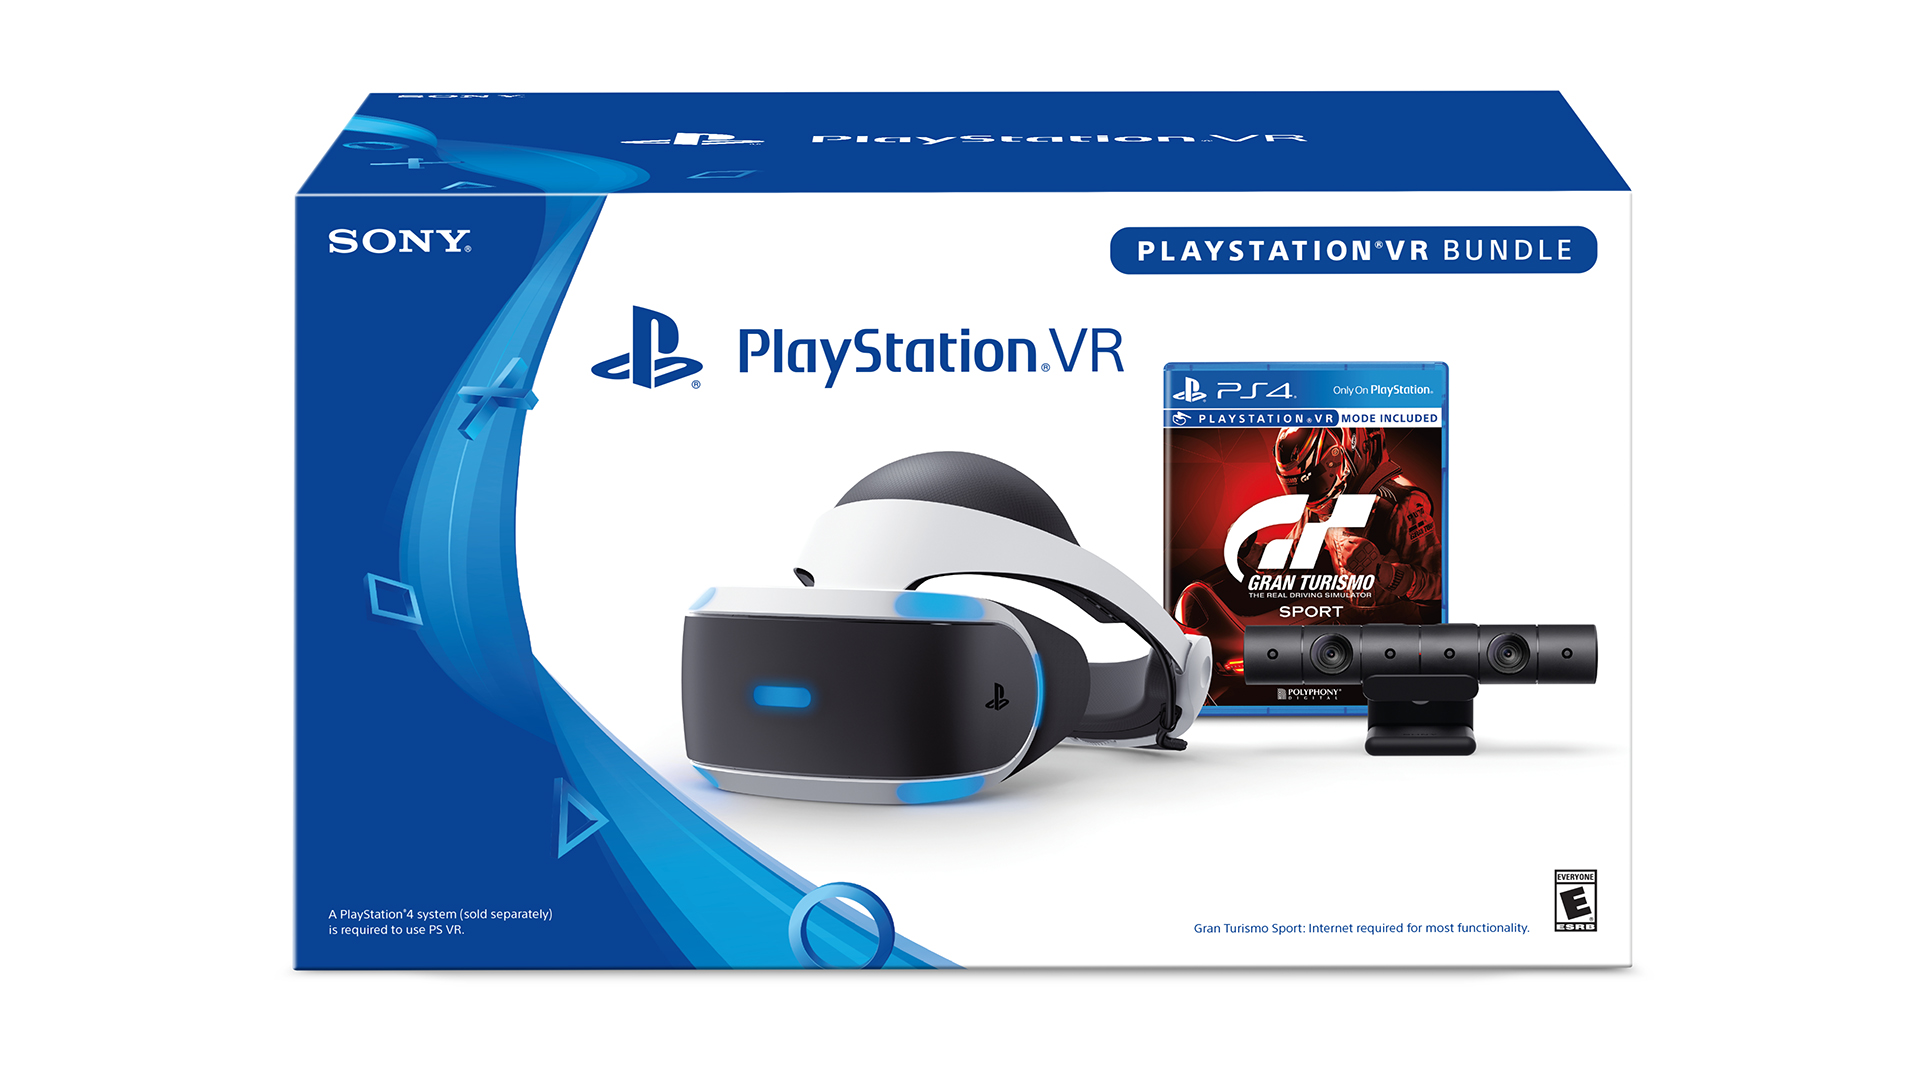 do you need a ps4 to use ps vr